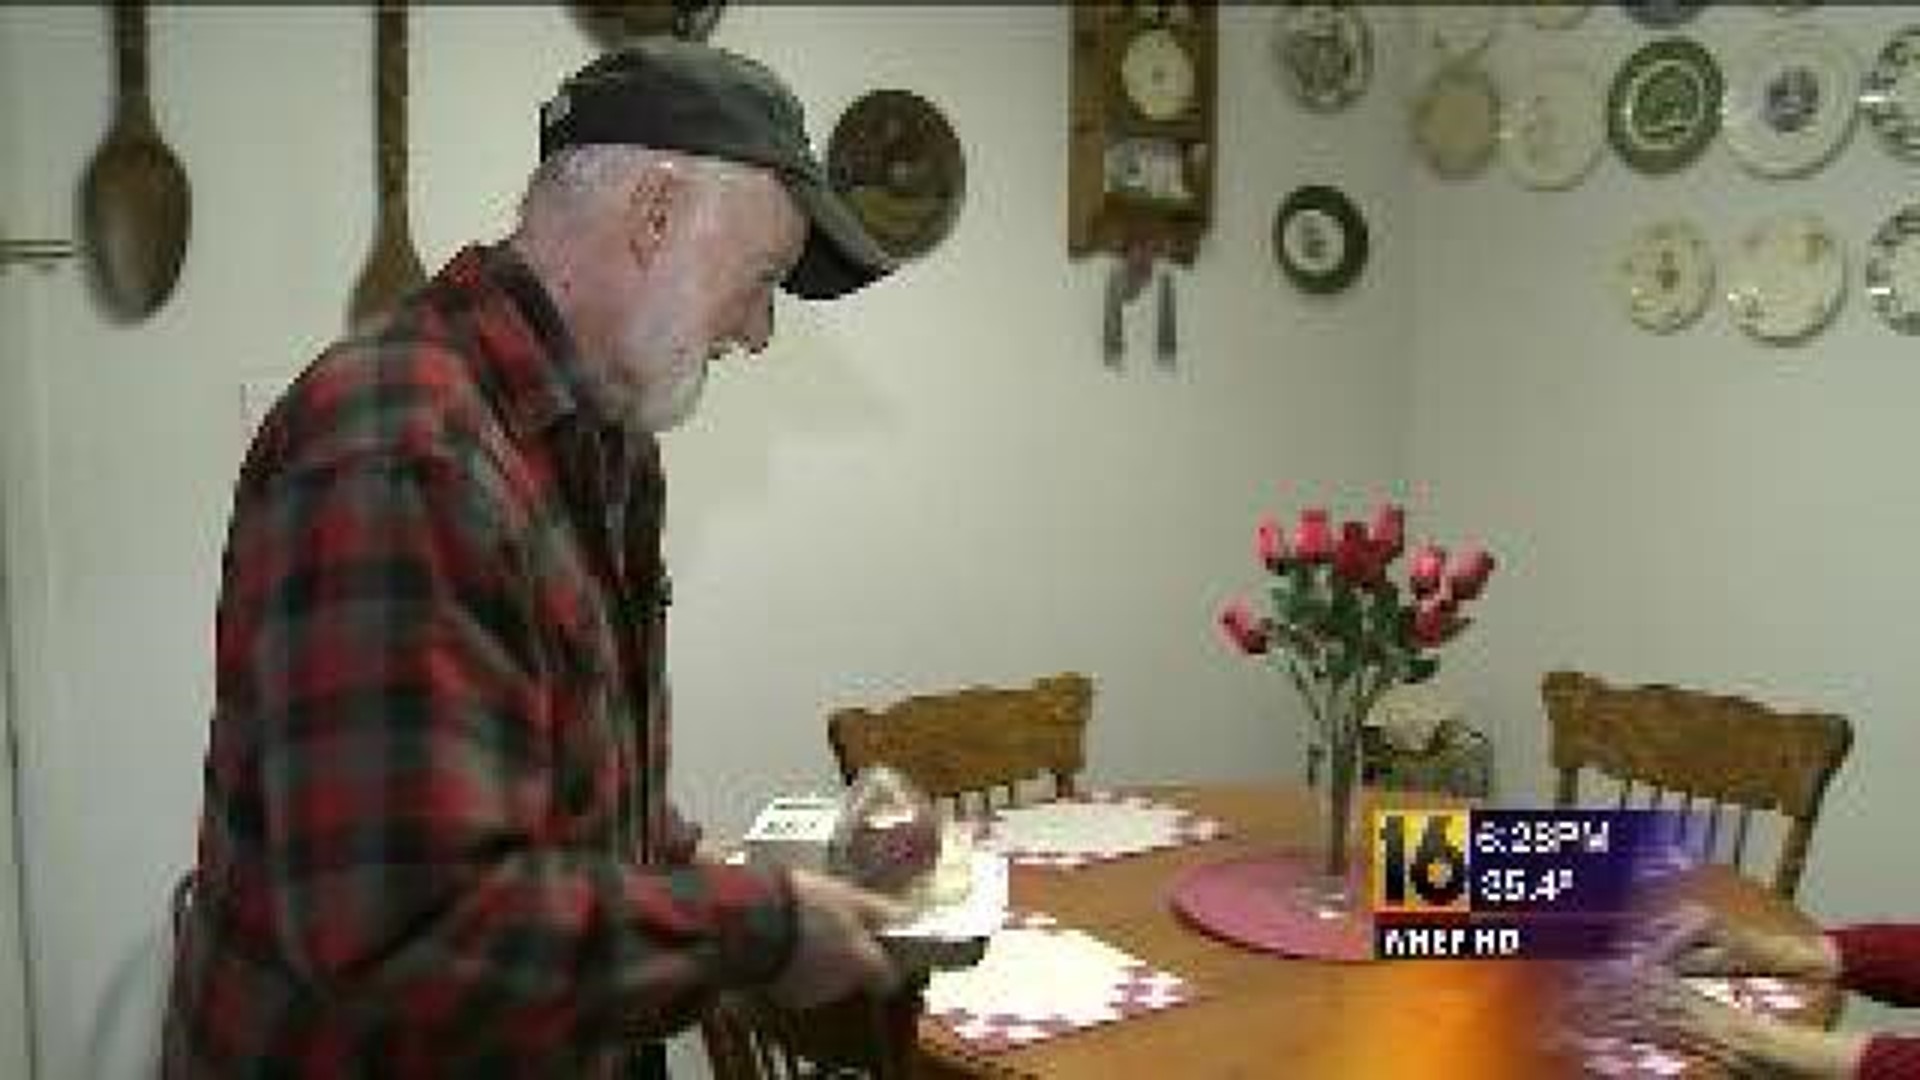 16 Salutes: Dedicated 85-Year-Old Meals on Wheels Driver